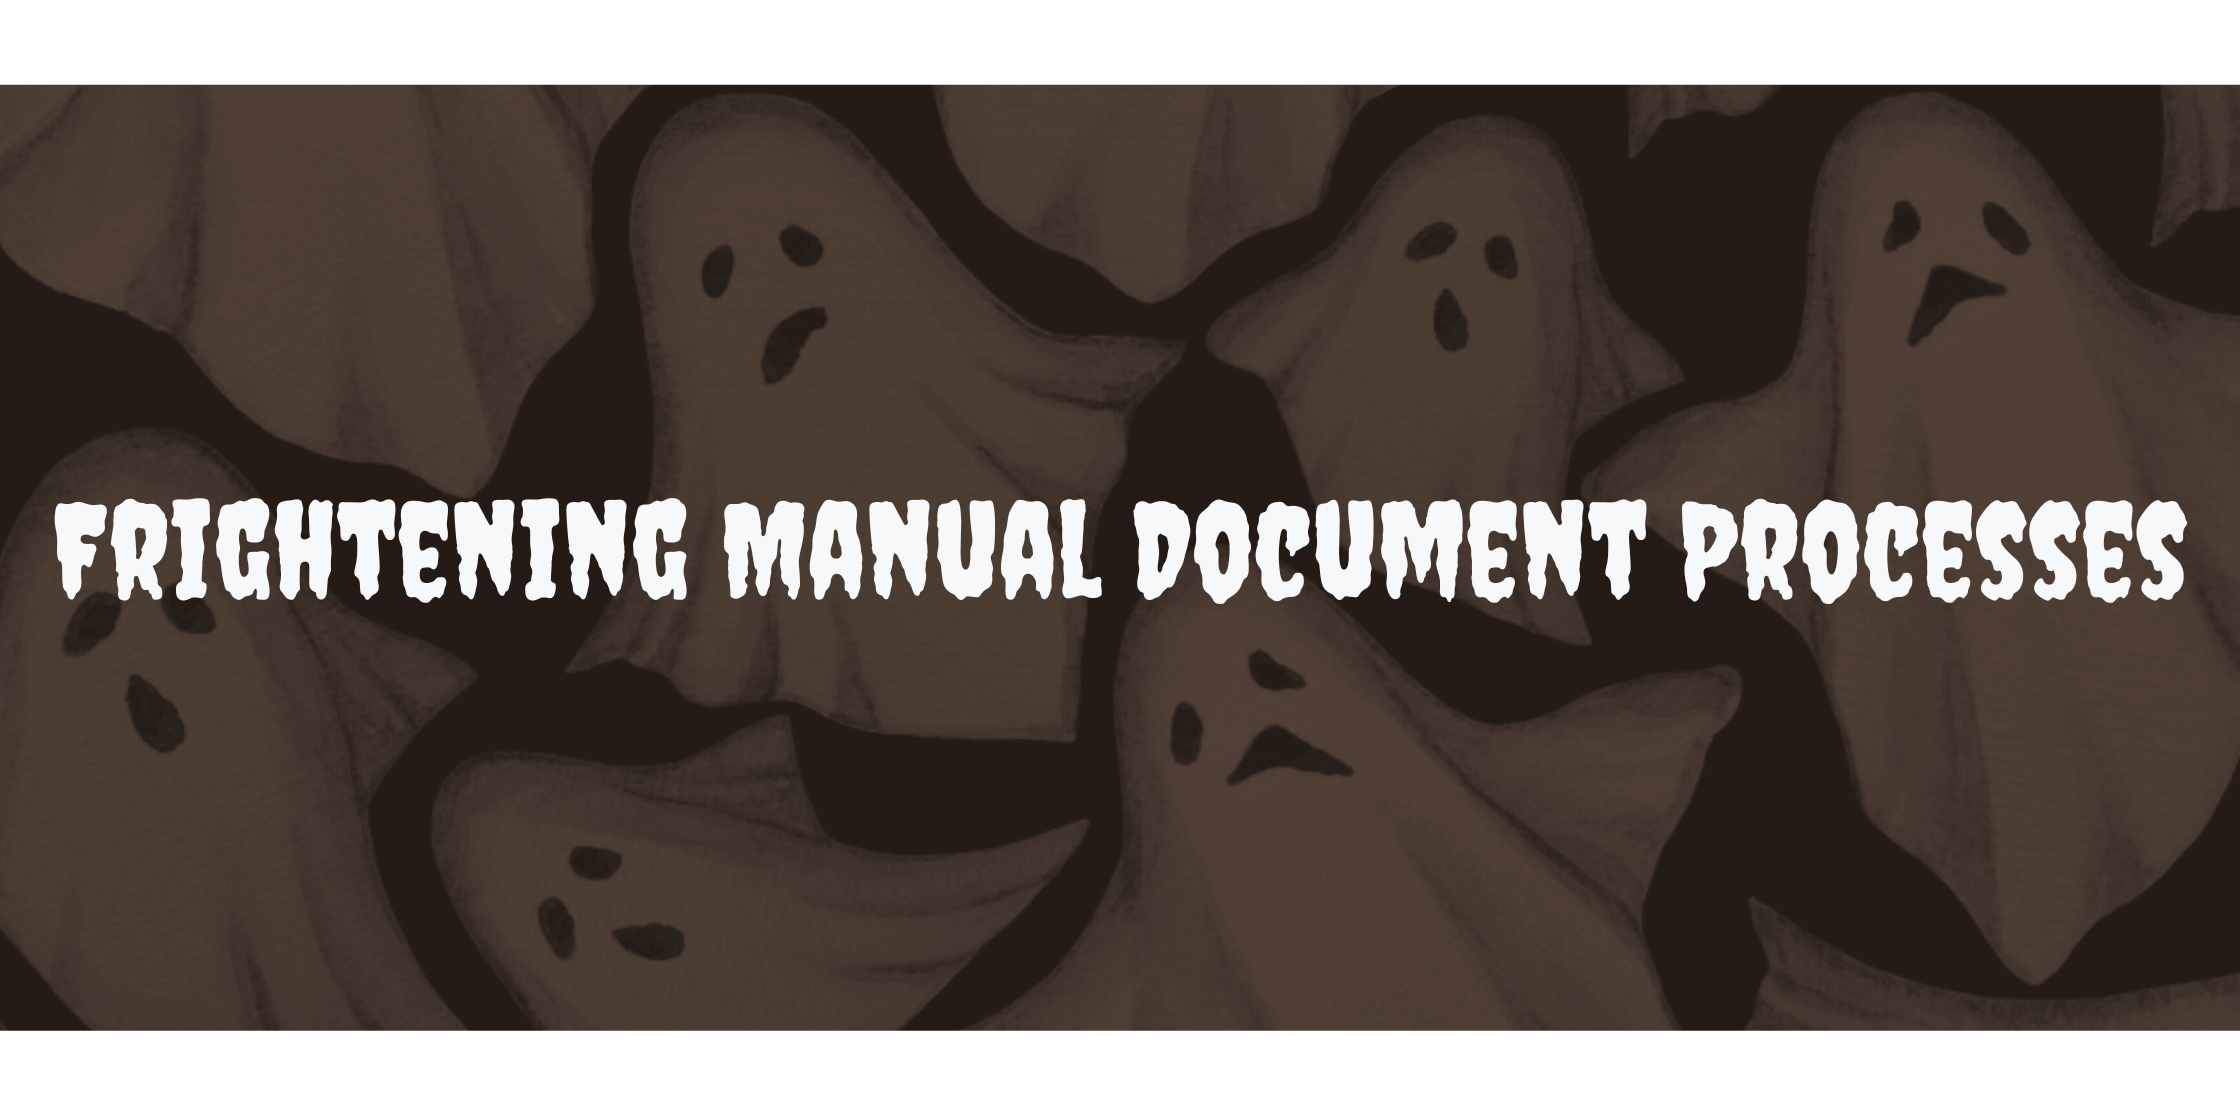 The Frightening Reality Of Manual Document Processes